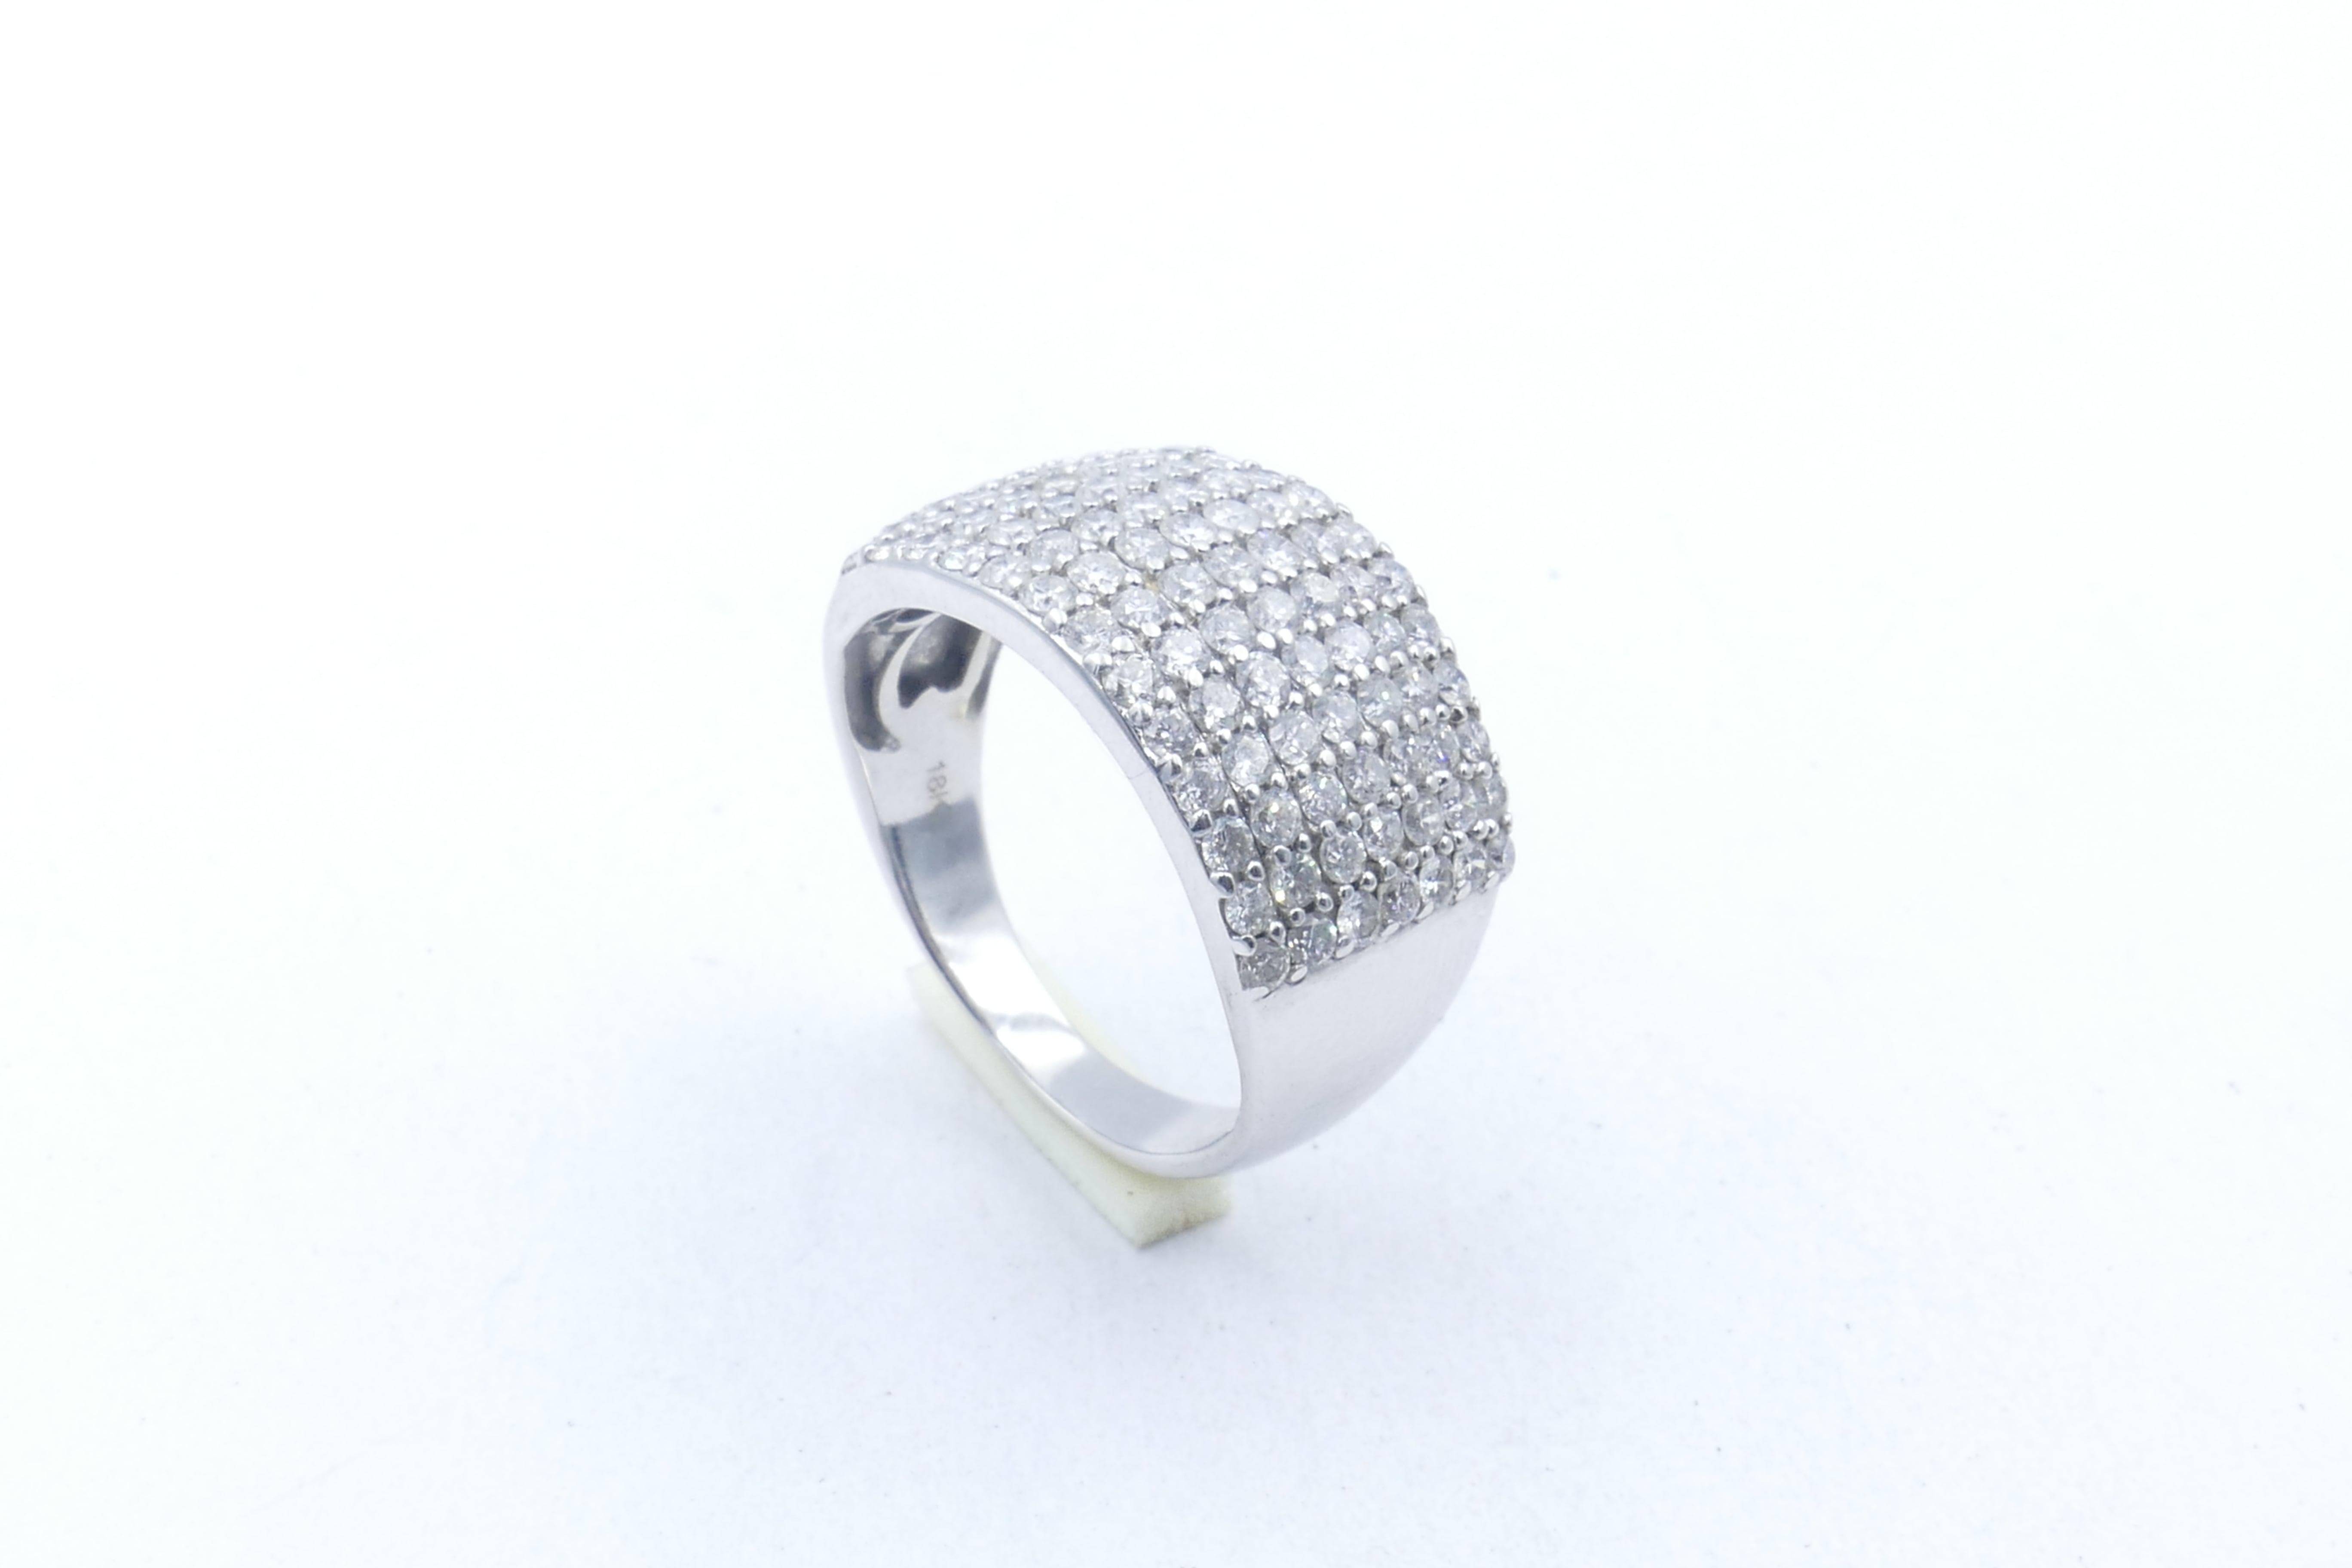 Traditional but SO smart!
Very wide multi band Ring consisting of 88 round brilliant cut Diamonds, good colour of G/I, Clarity SI1-SI2, & pave set.
The Band is polished, low half round, reverse tapered & measures 7.15mm at the base of the shank